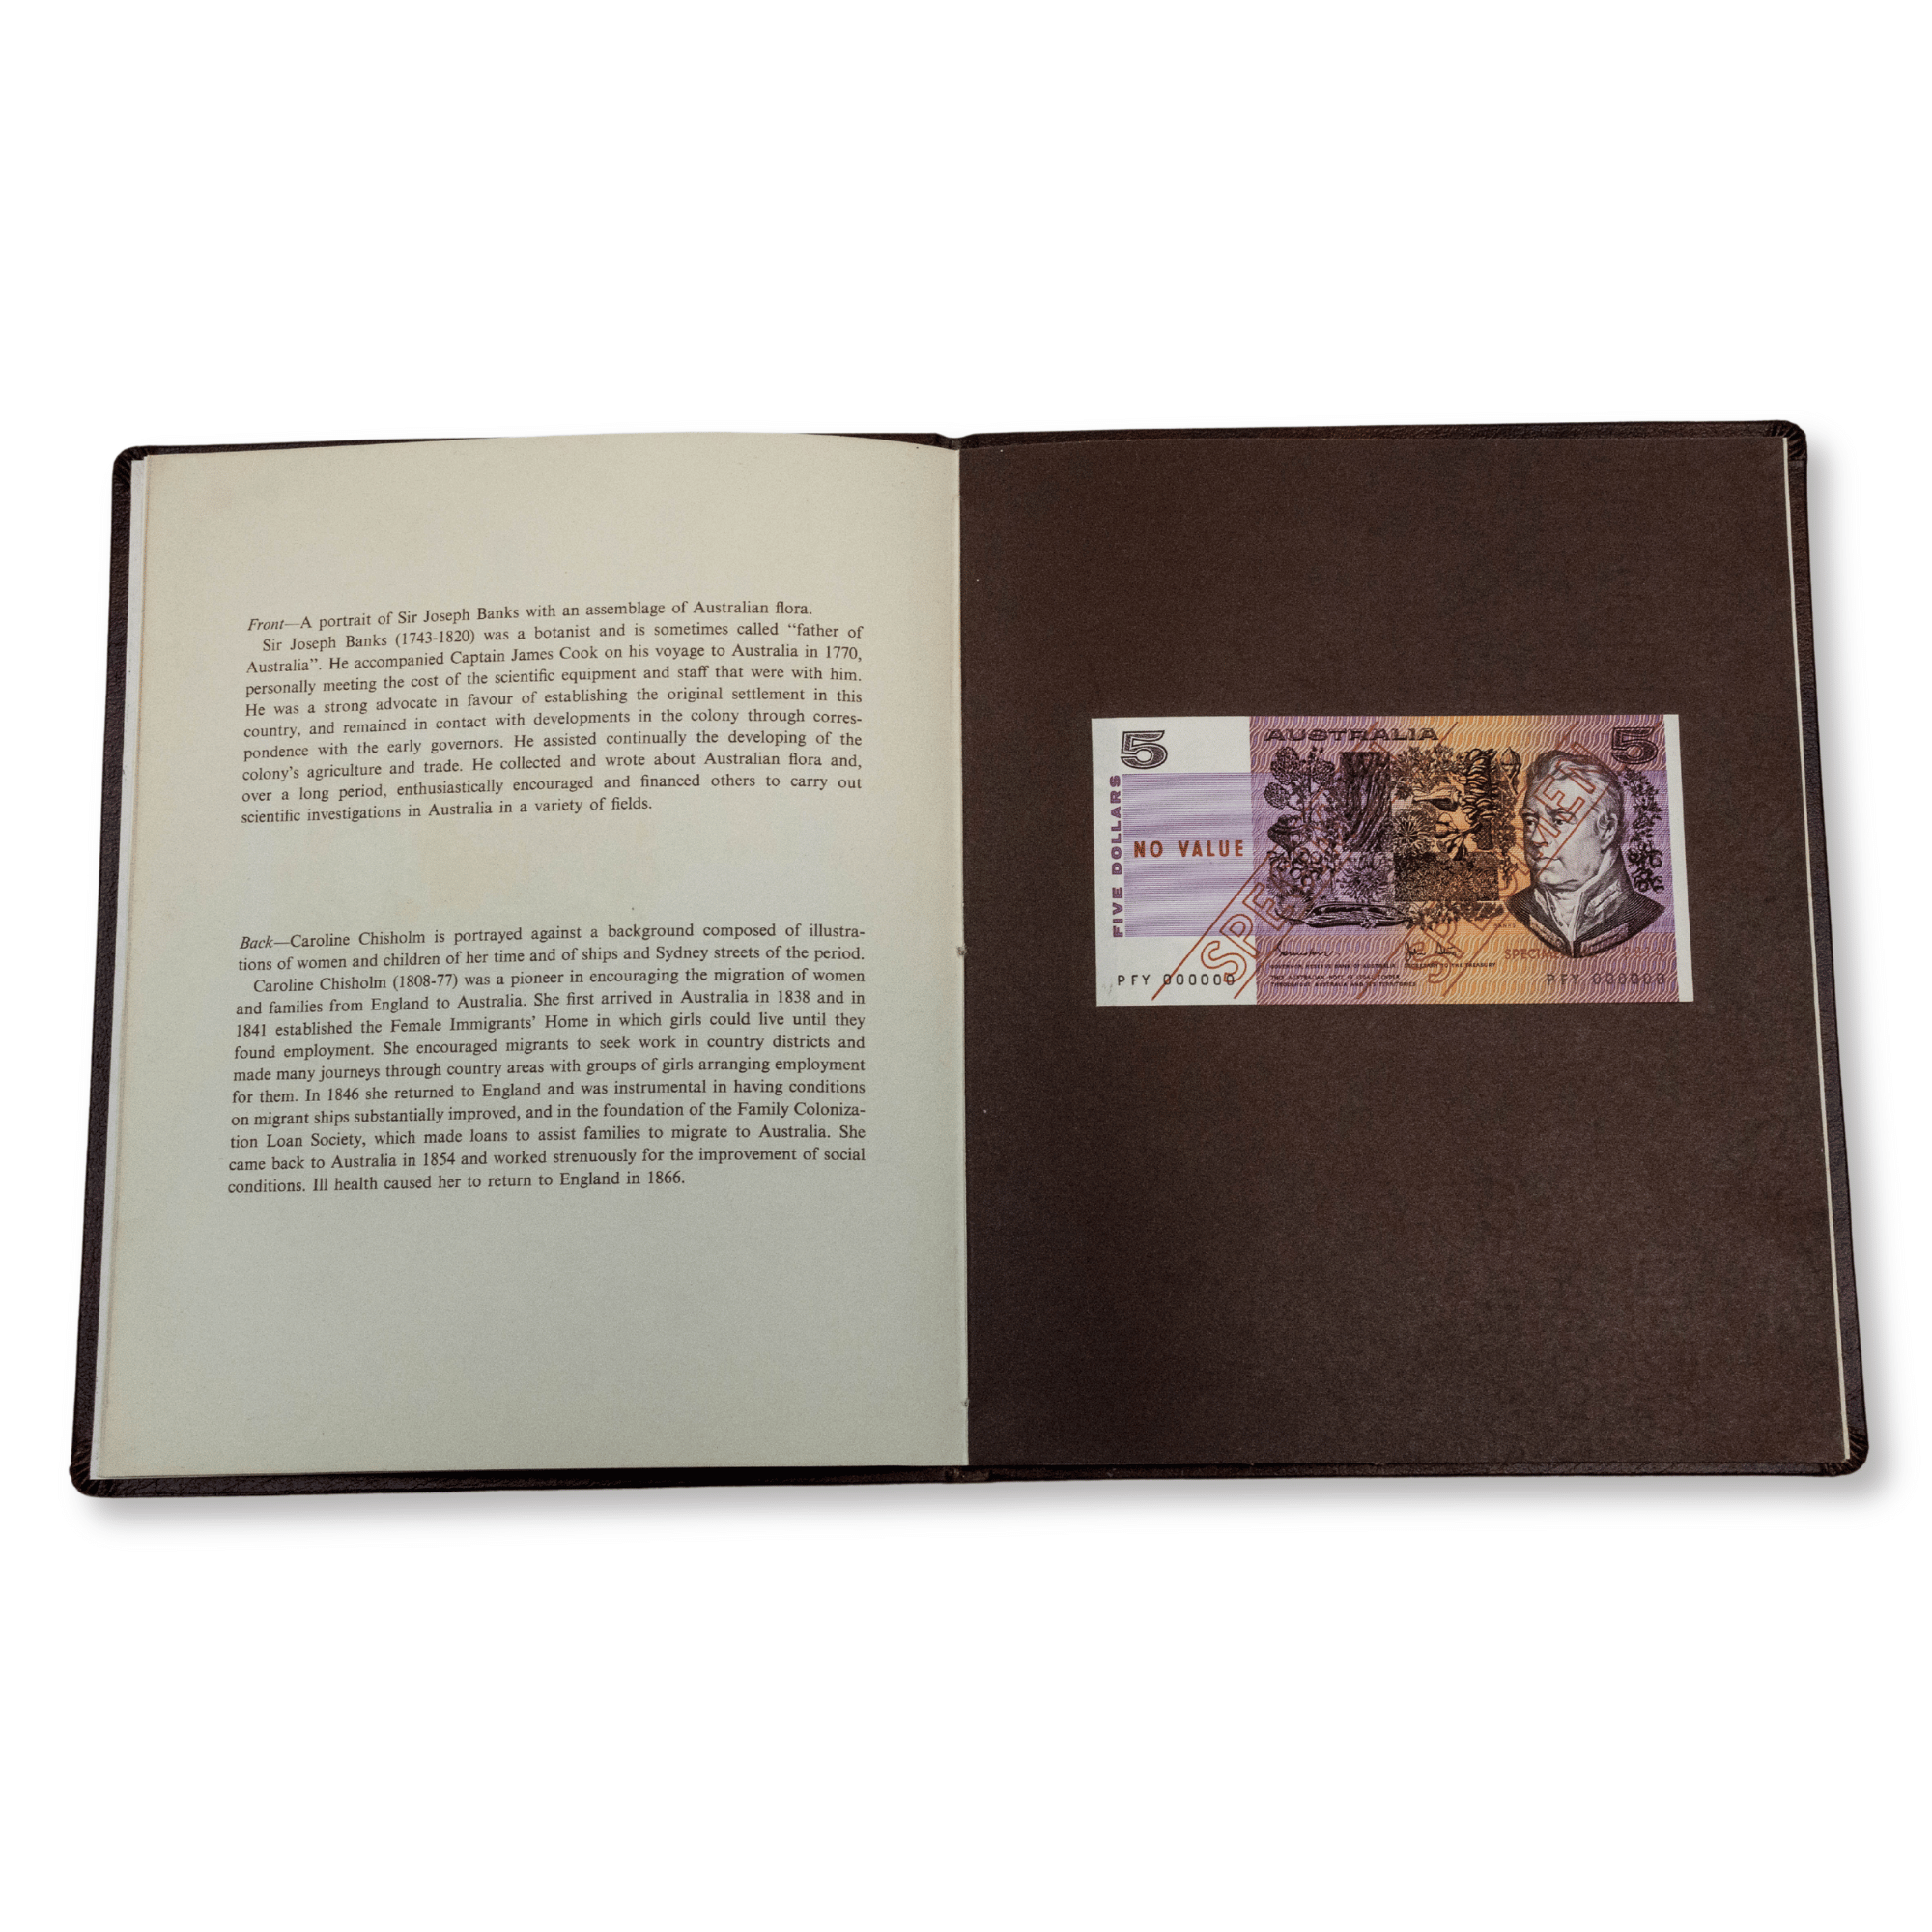 TAA Specimen Banknote Set Extremely Rare